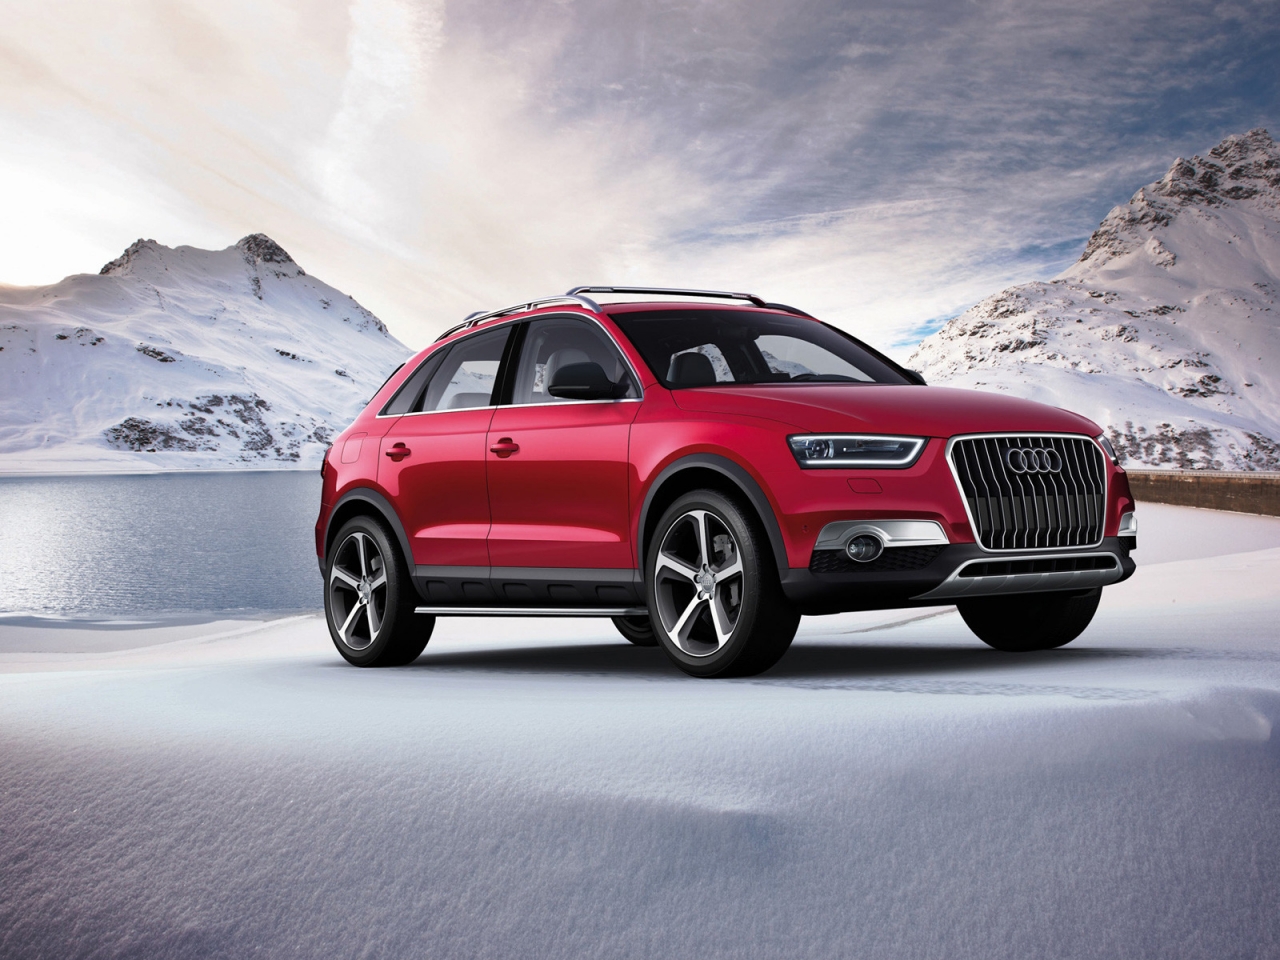 2012 Audi Q3 Vail for 1280 x 960 resolution